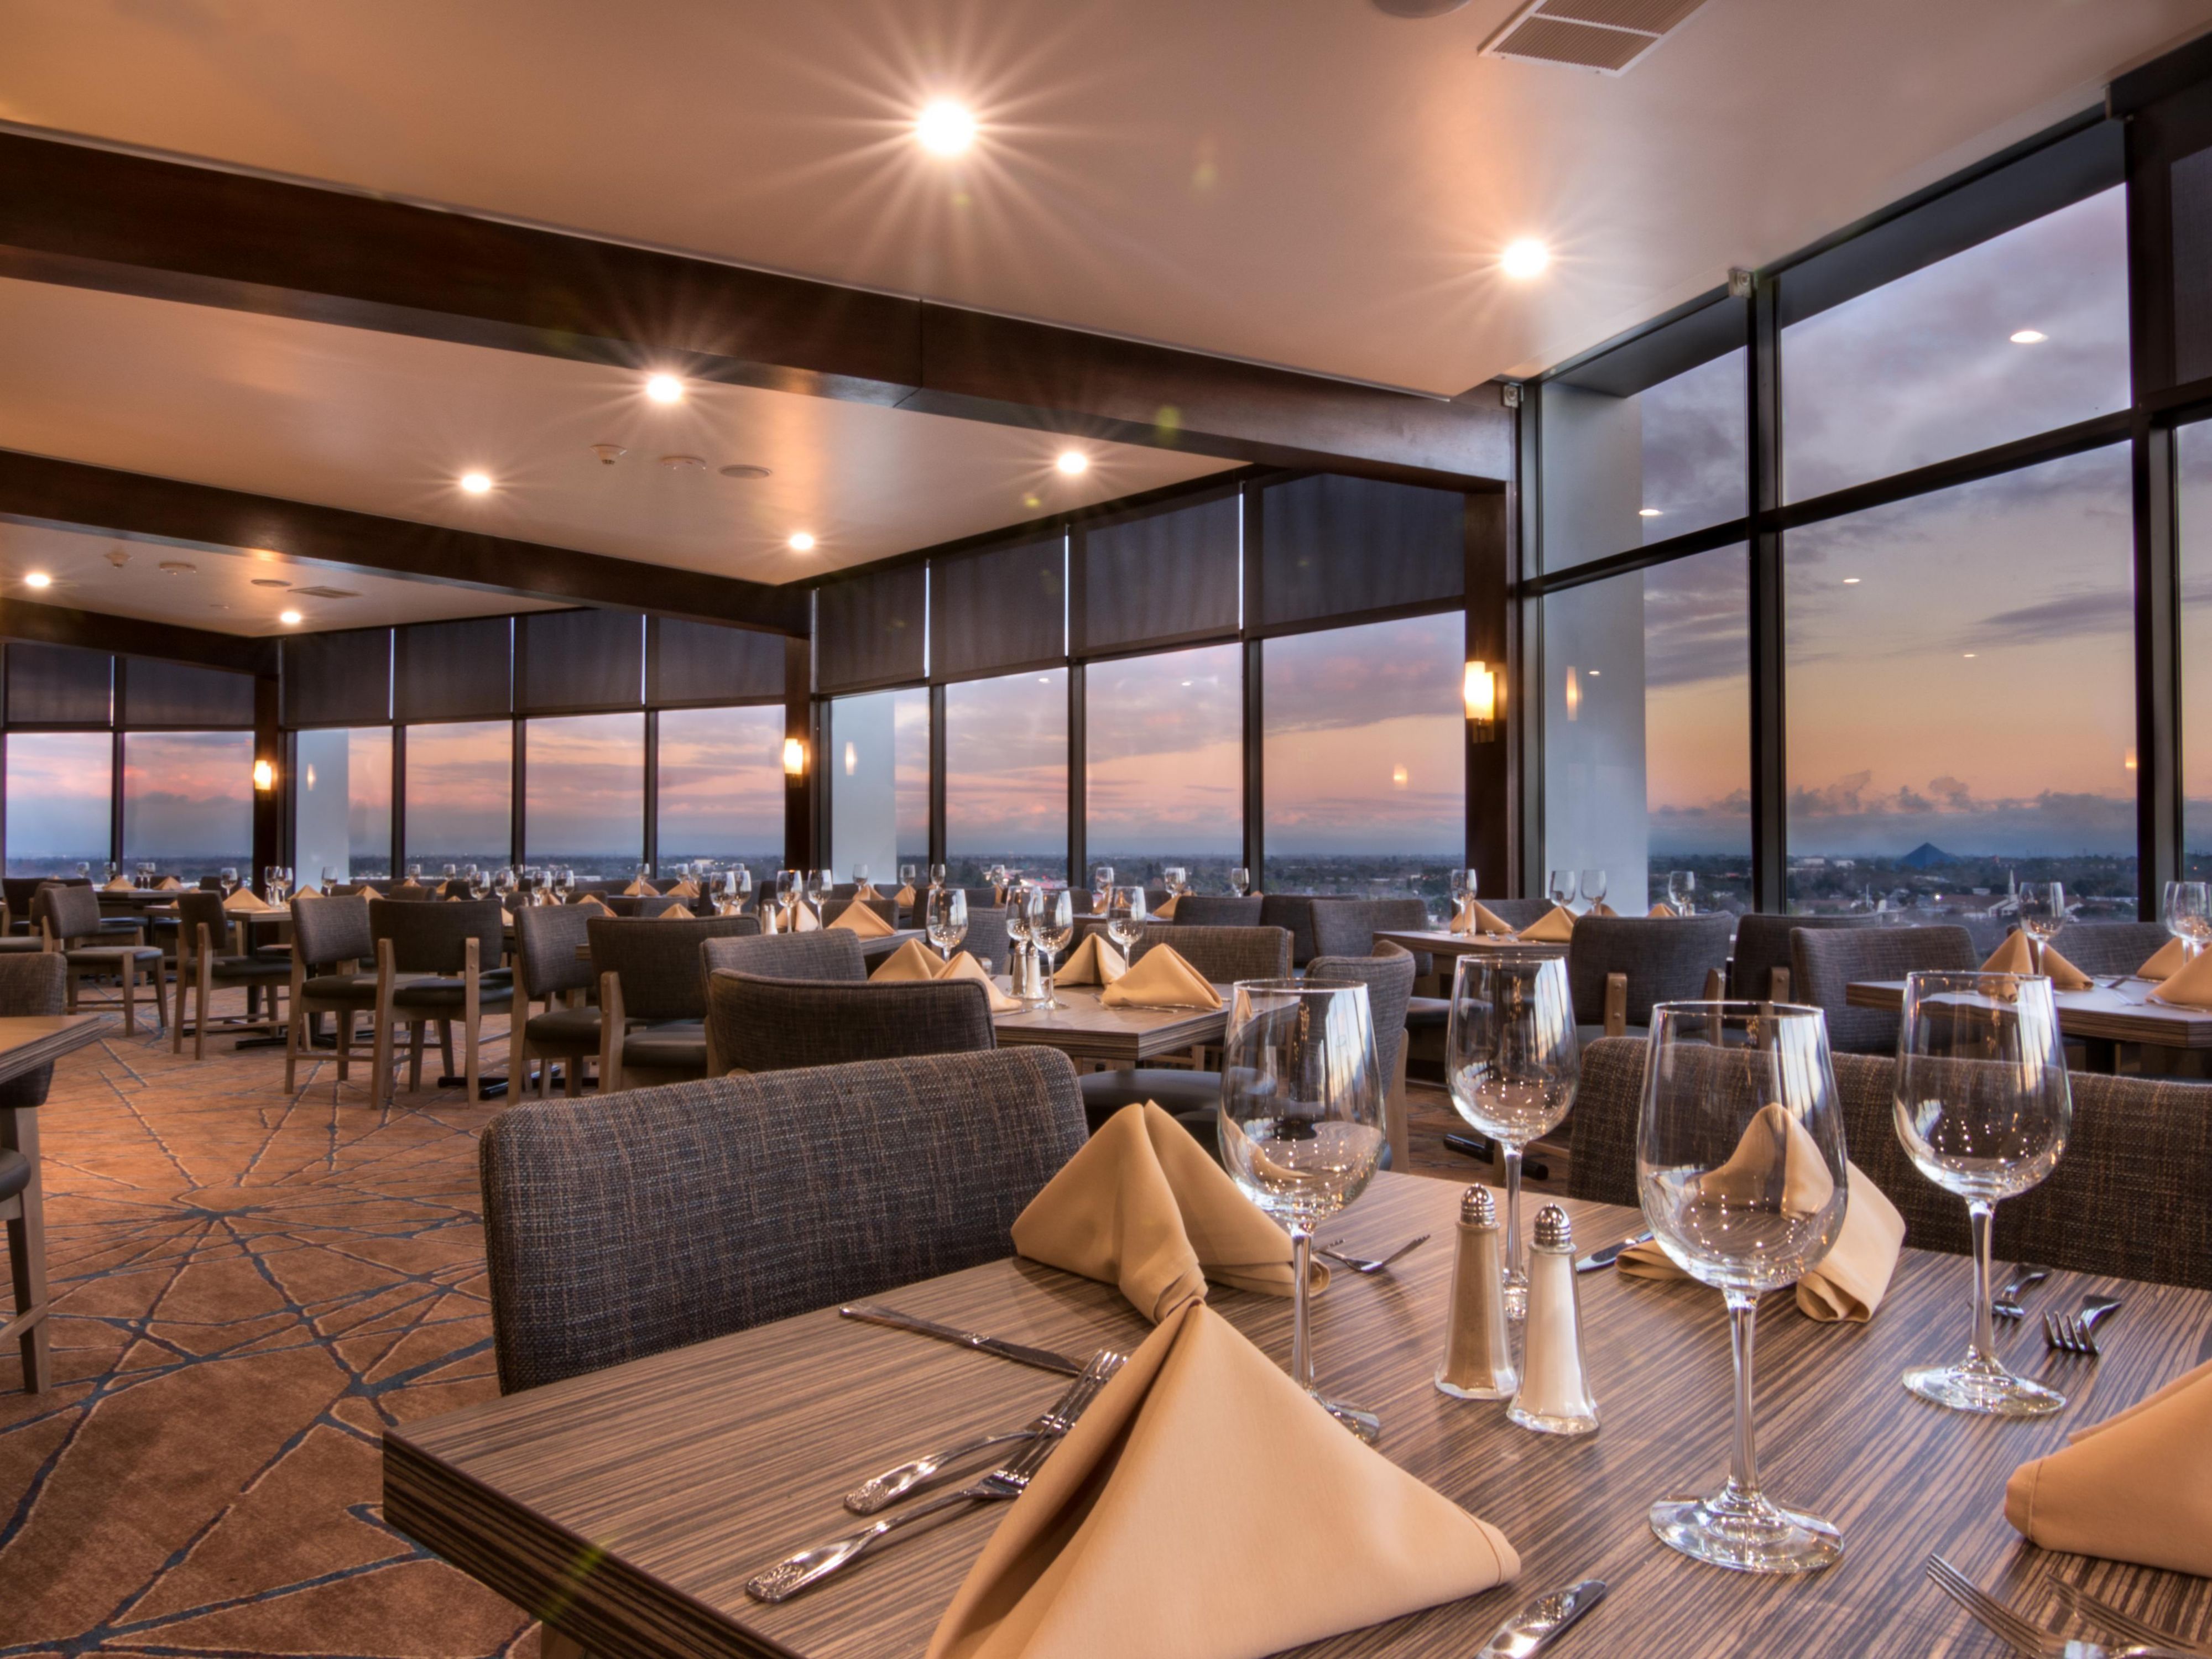 Quite the view at VUE Bar and Restaurant with a panoramic view of the Long Beach city skyline, our VUE Bar and Restaurant delivers California-inspired regional cuisine and a unique place to enjoy it. No matter what you crave, we have something on the menu to satisfy you.